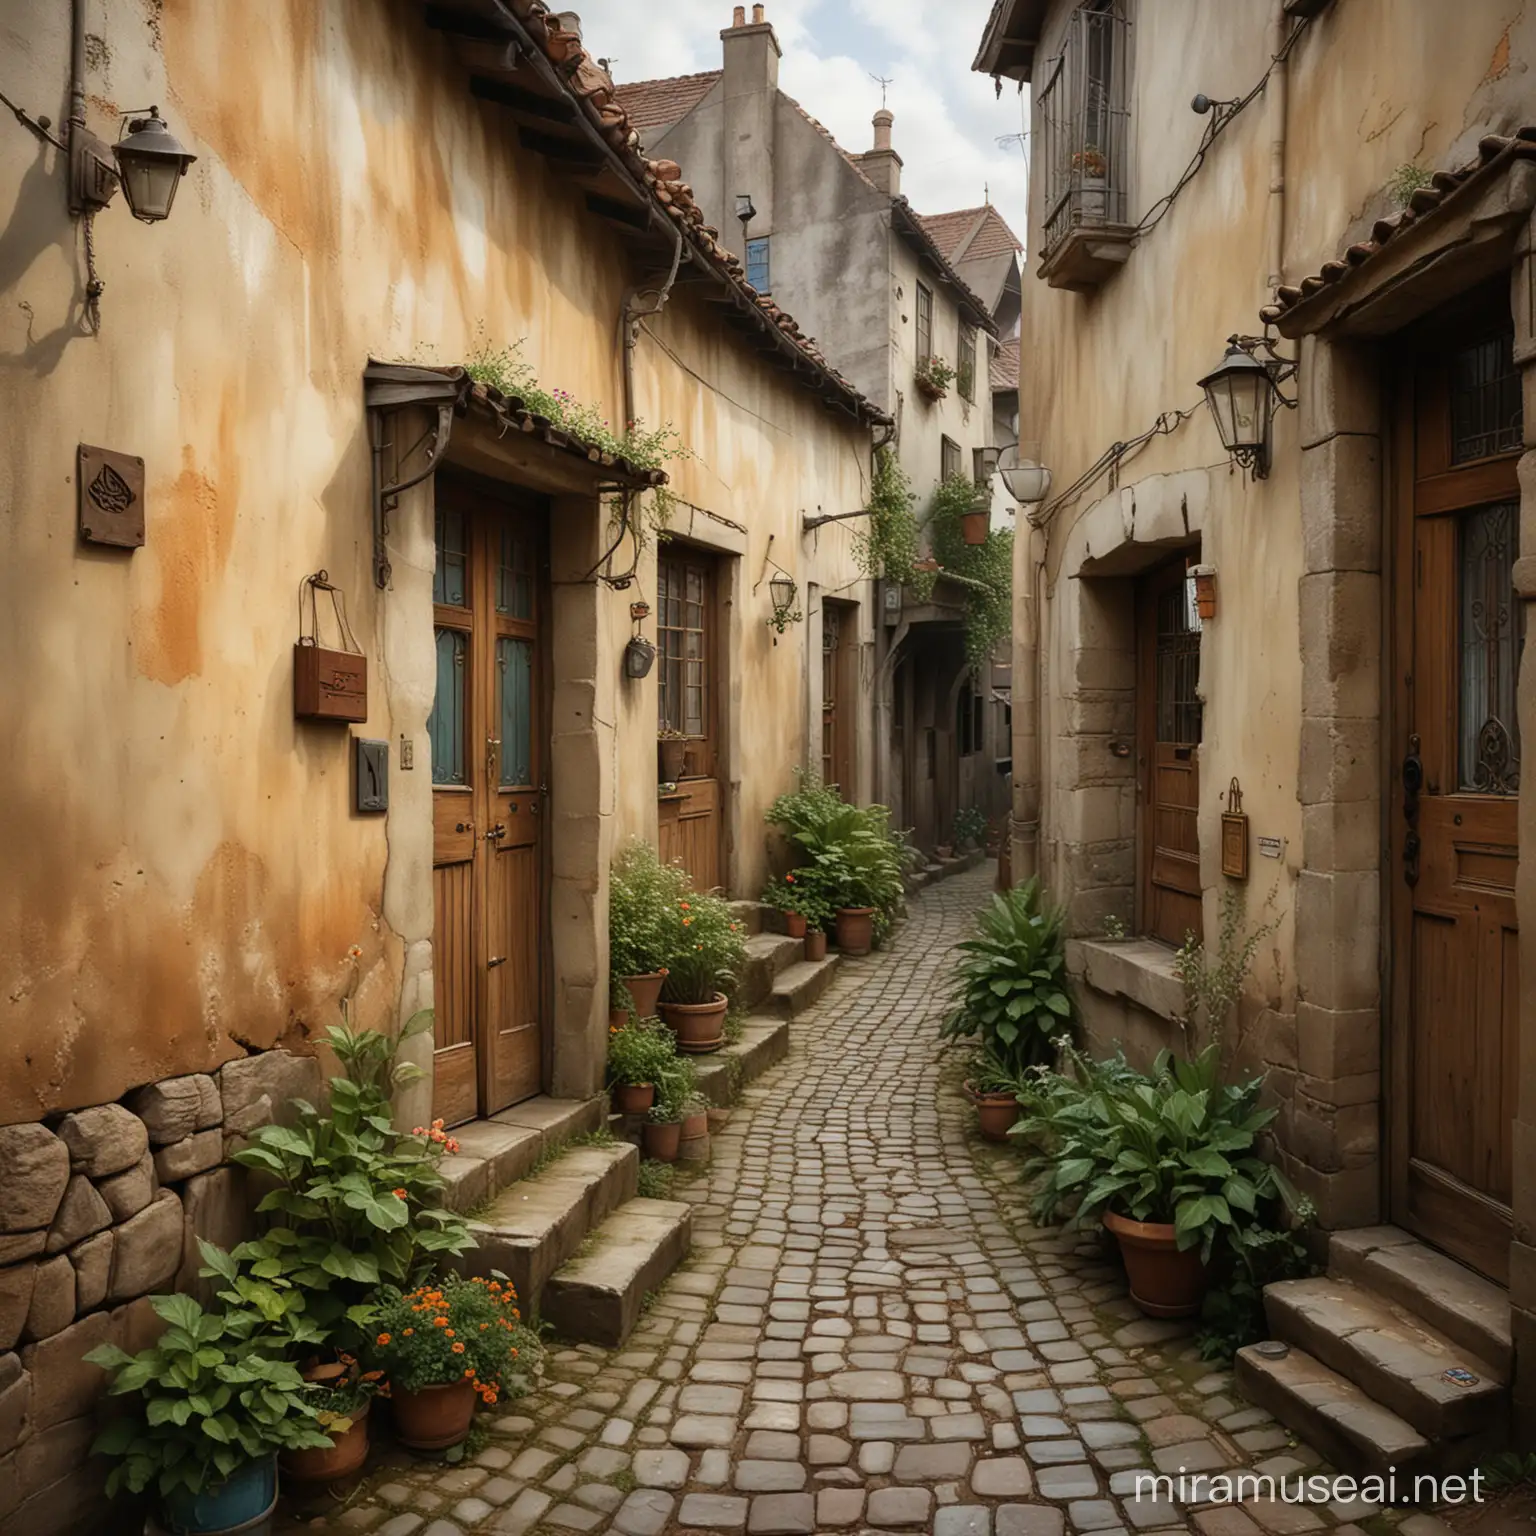 Enchanting Surreal Village with Quaint Cottage and Cobblestone Streets